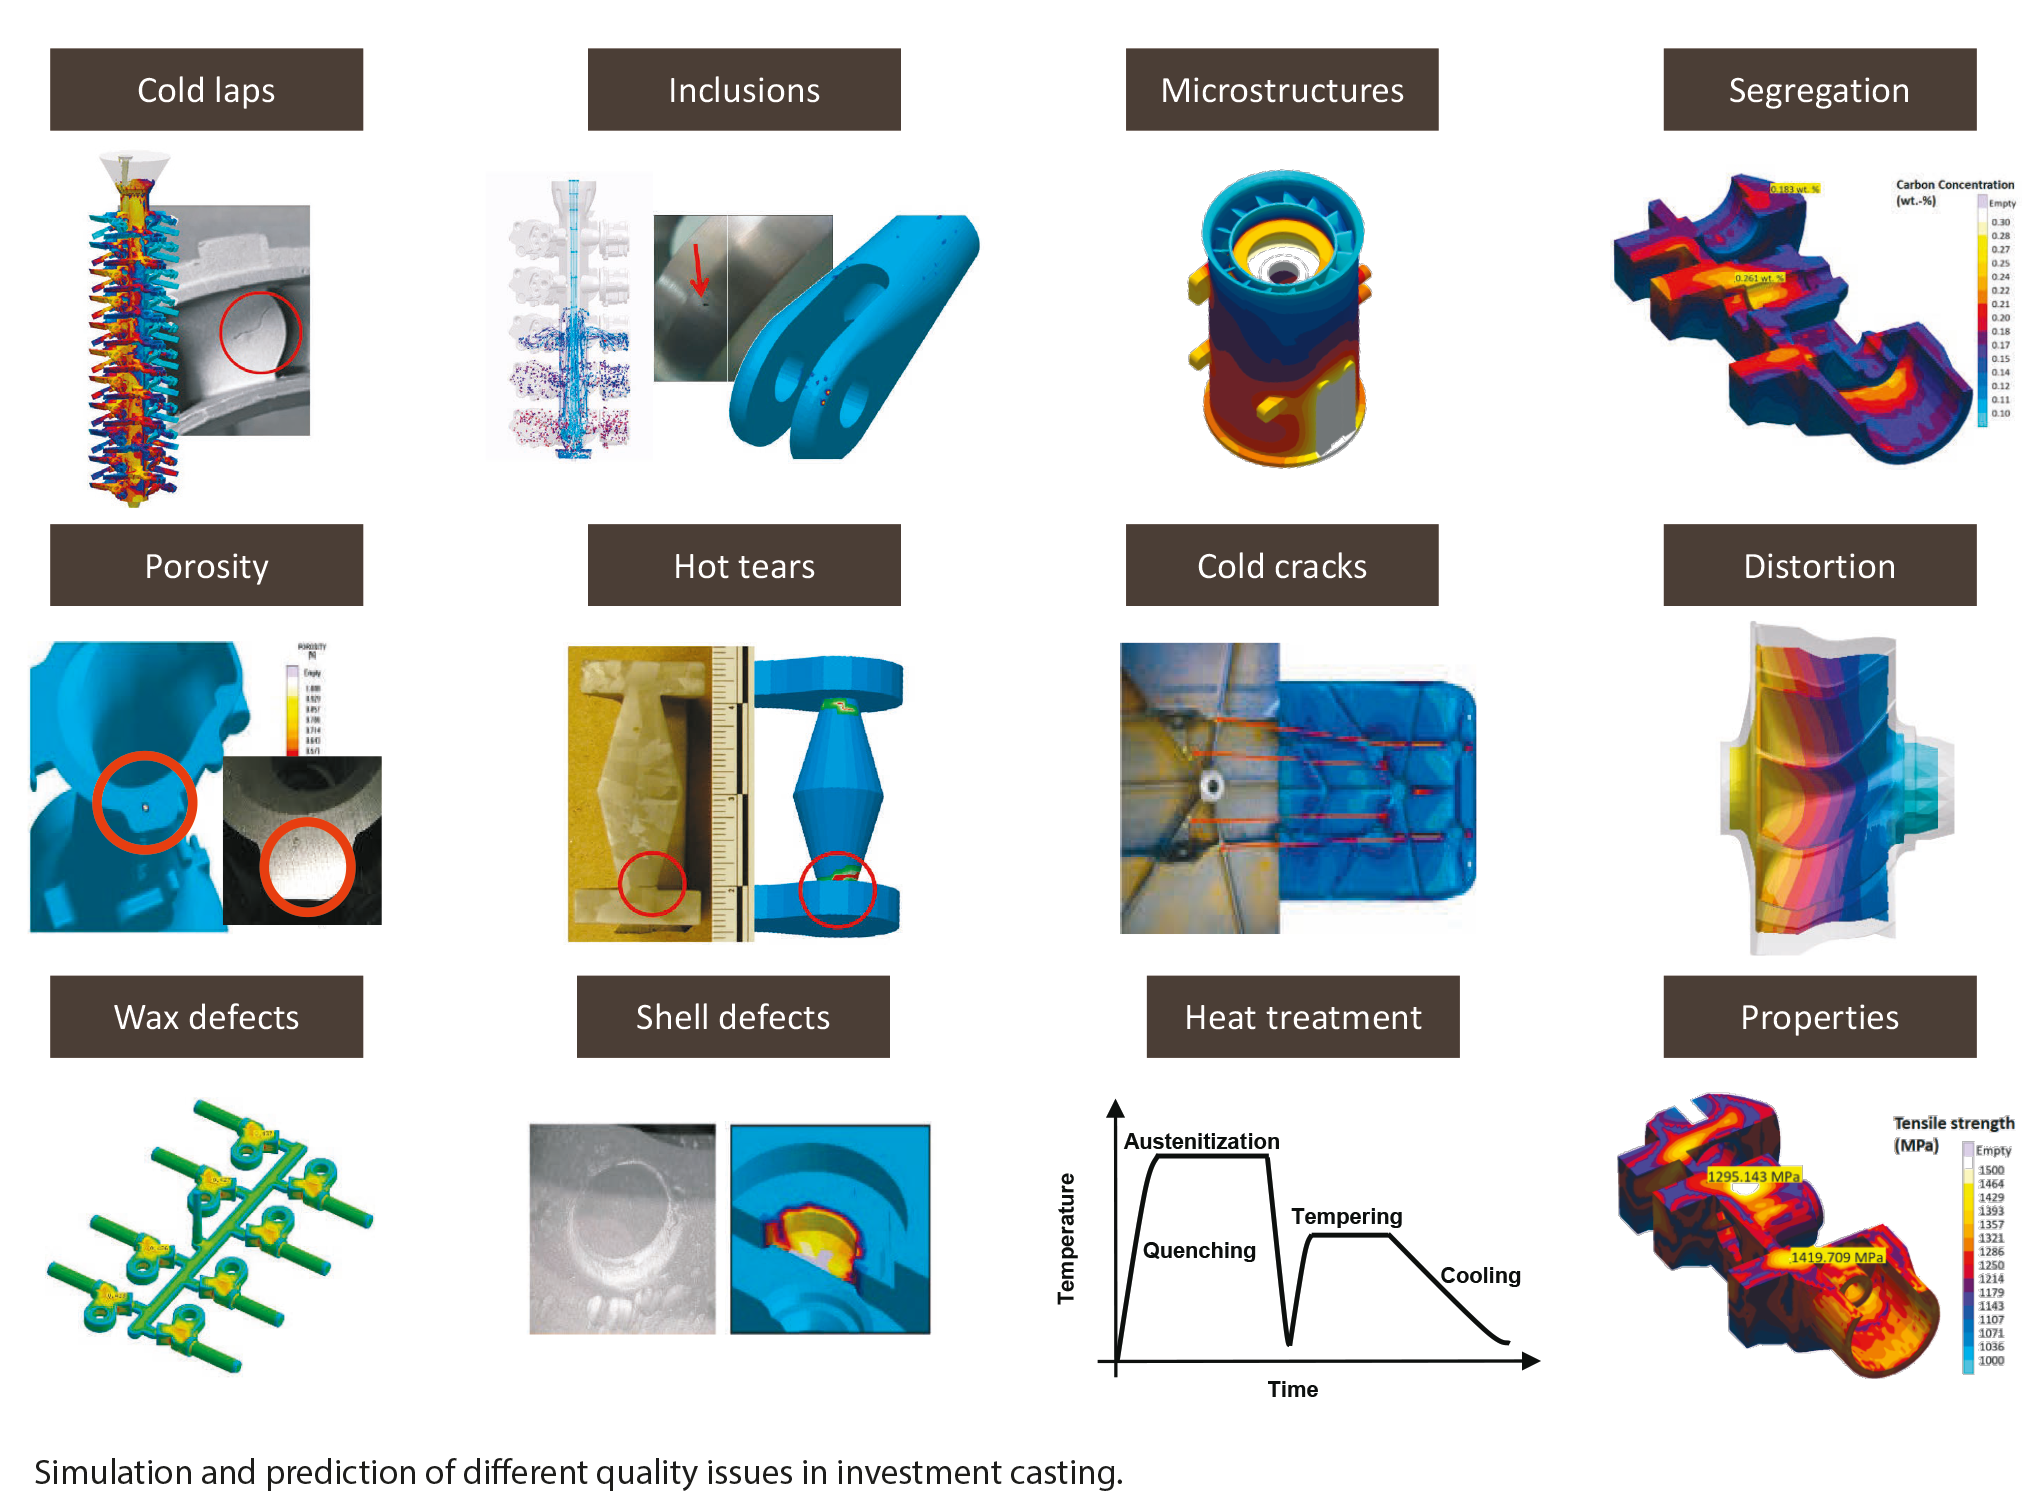 Simulation and prediction of different quality issues in investment casting (c) MAGMA GmbH